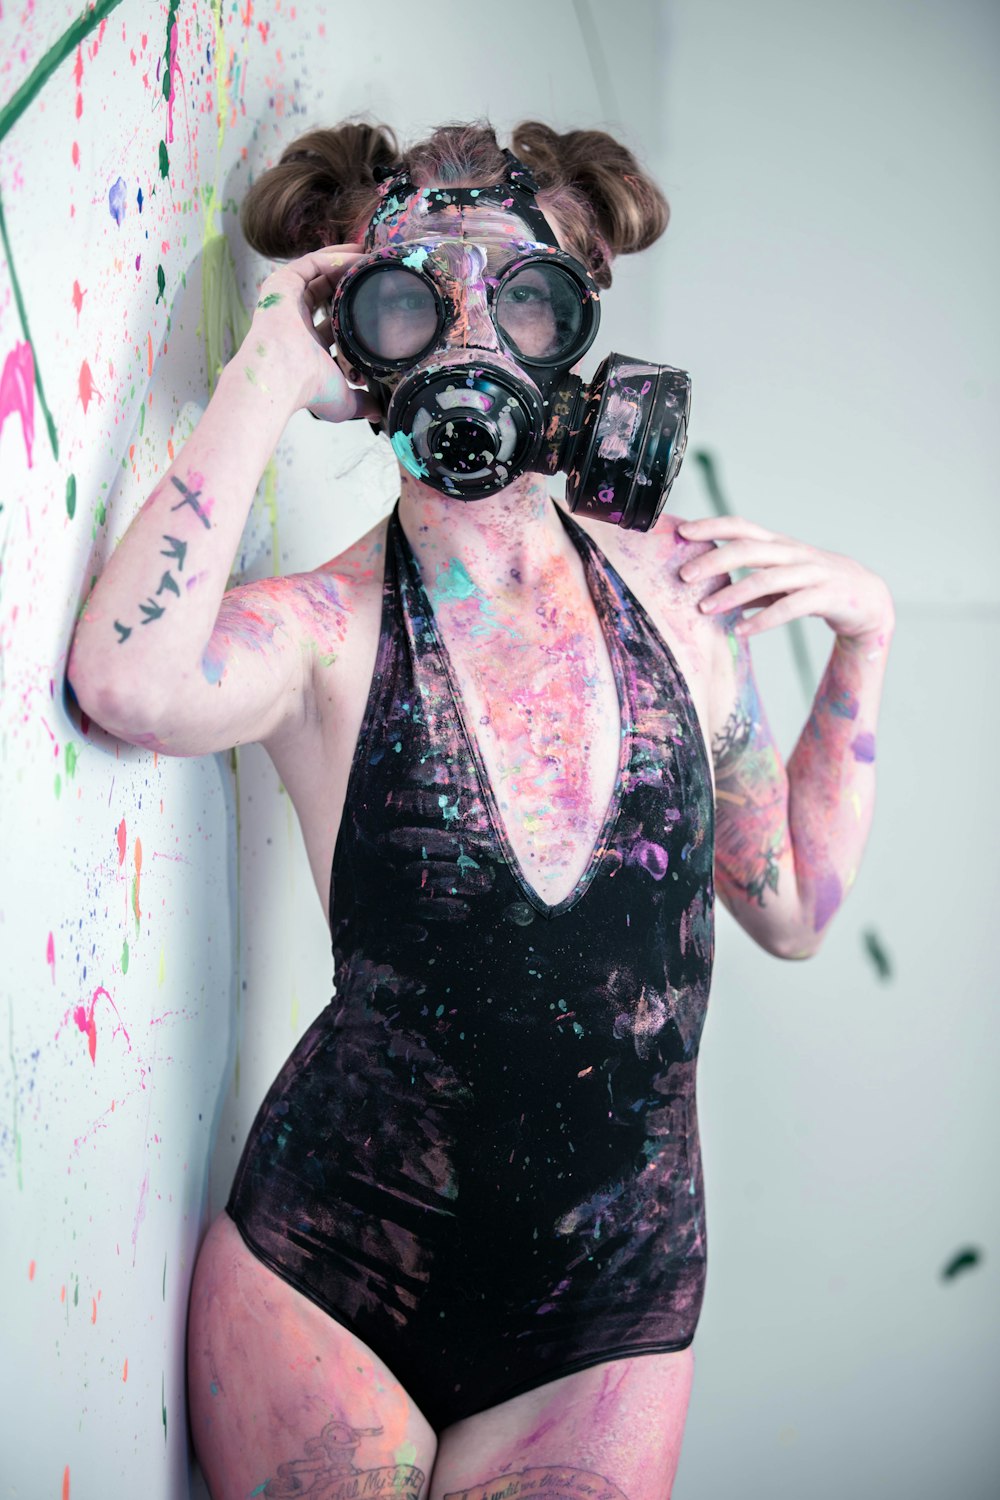 woman wearing air mask while body covered with paints